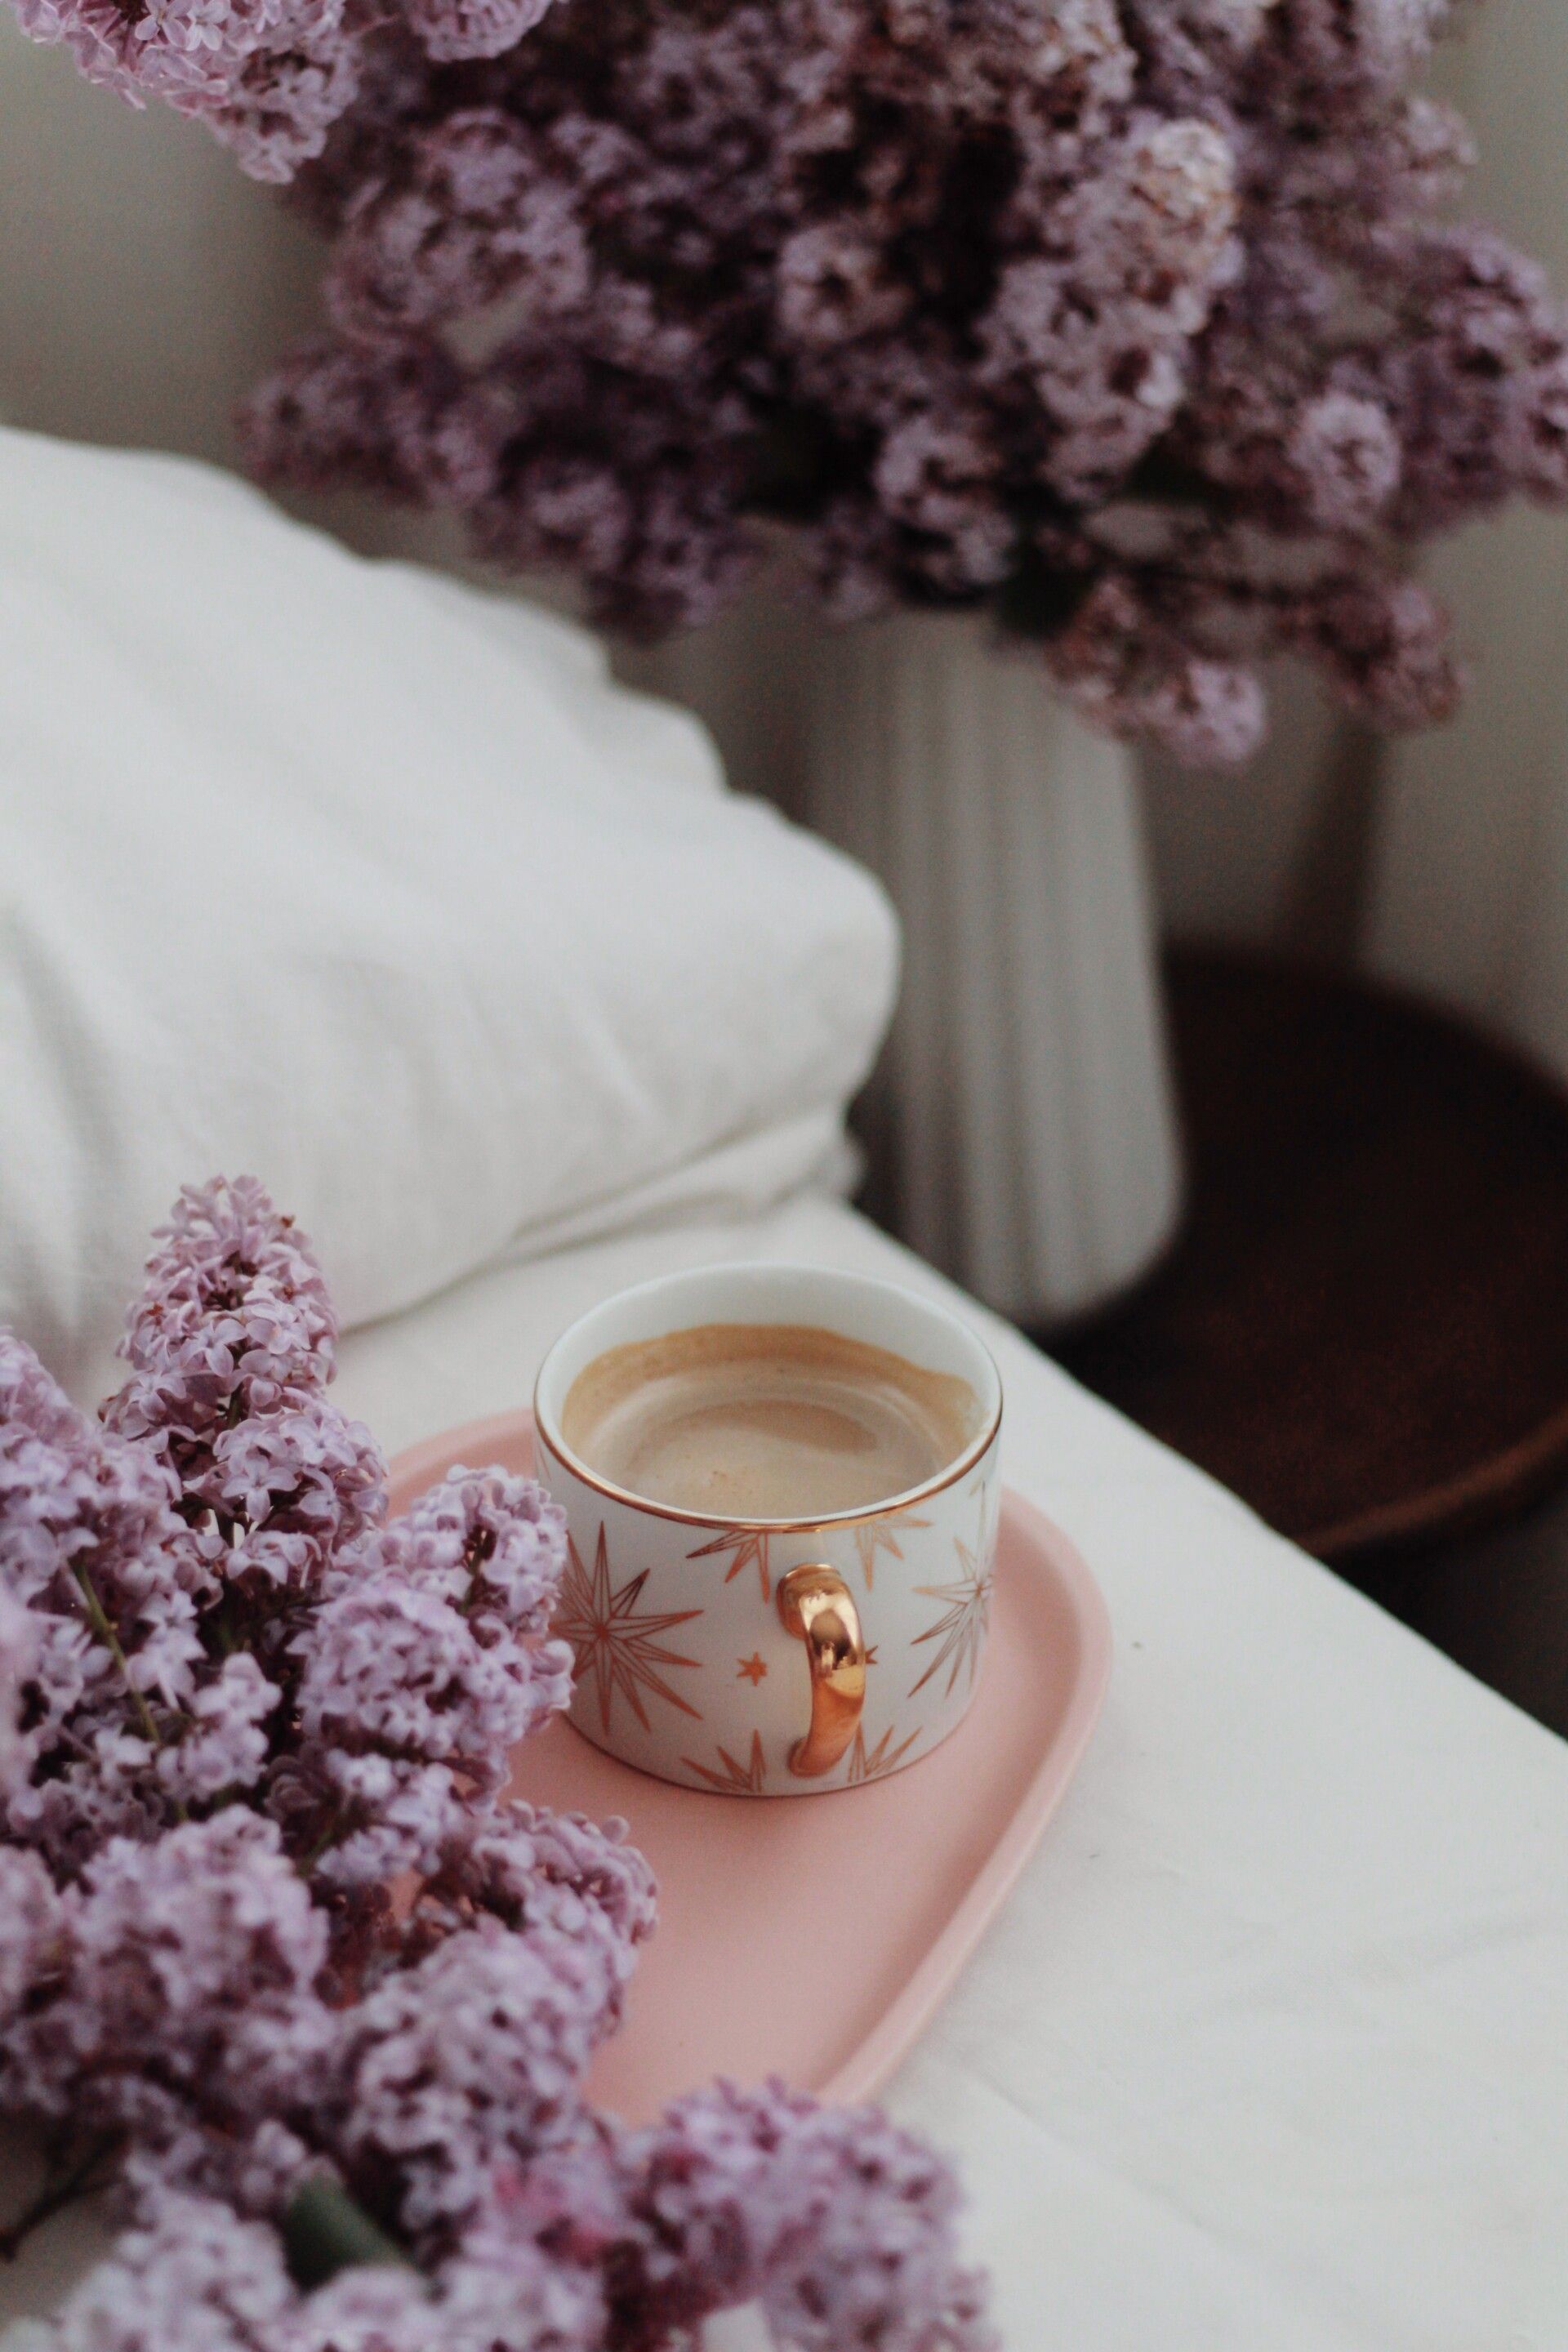 A cup of coffee on a pink tray next to a bunch of purple flowers - Spring